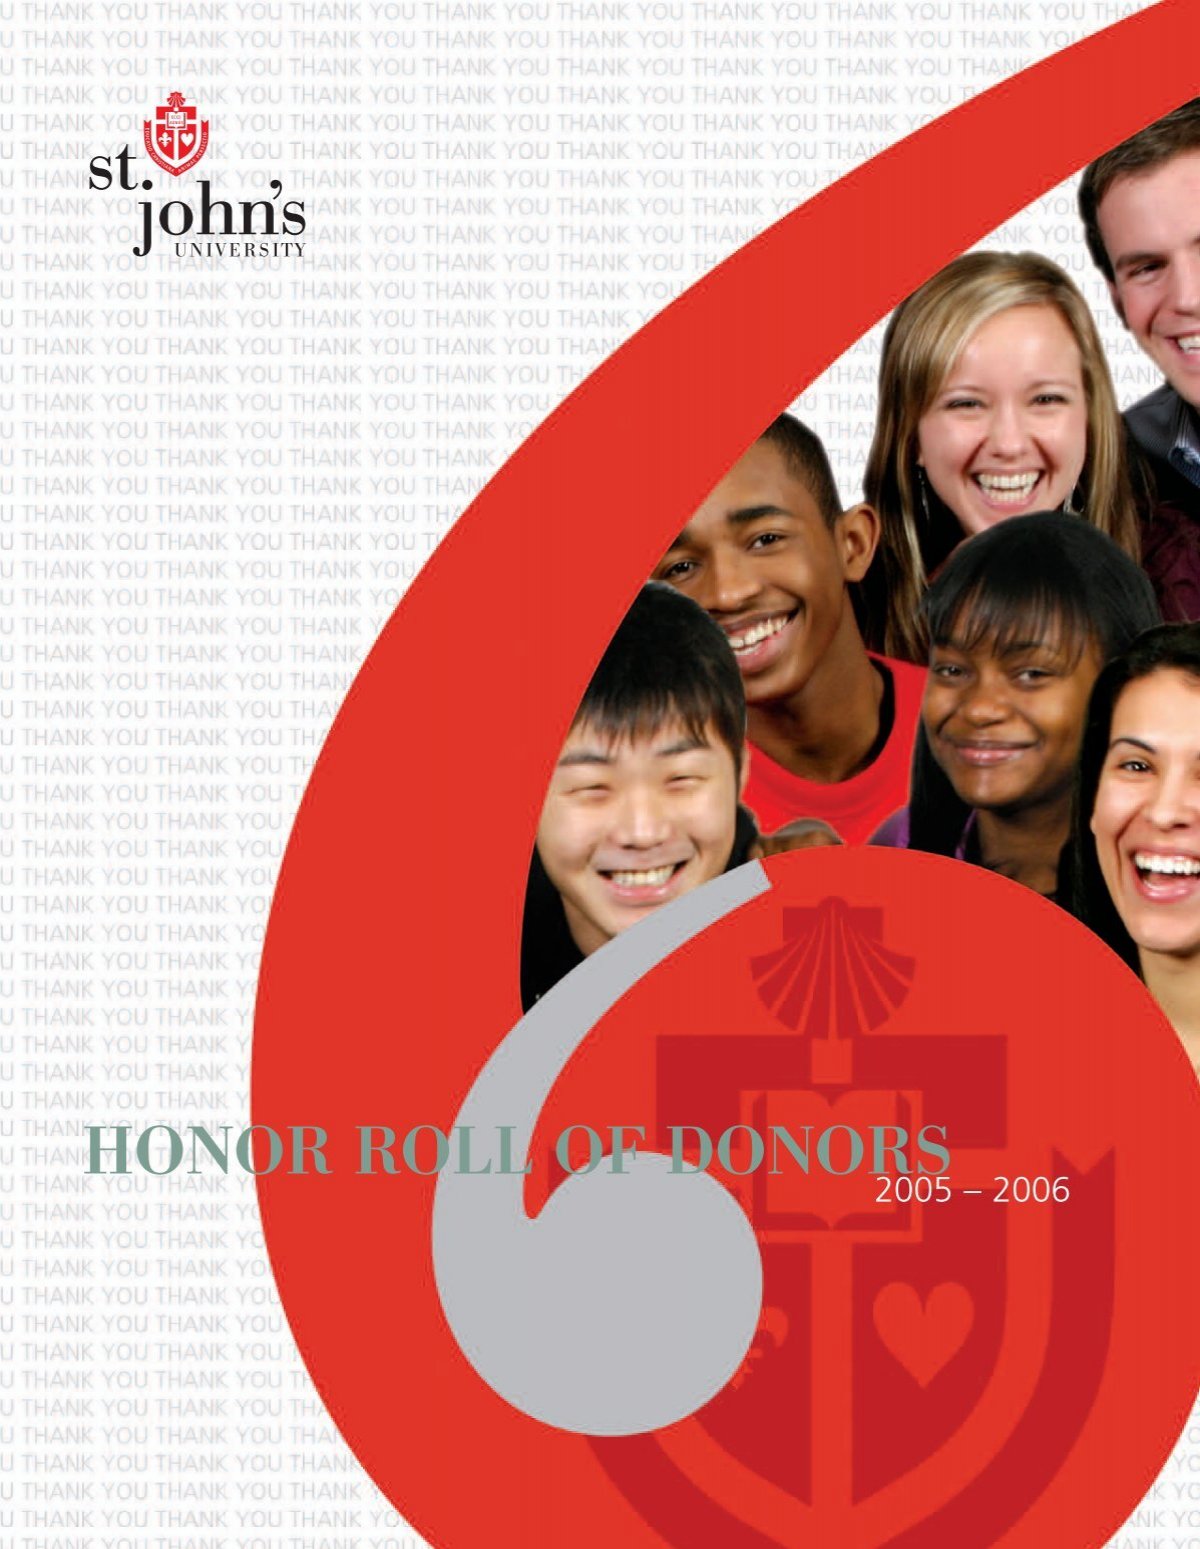 HONOR ROLL DONORS - St. John's